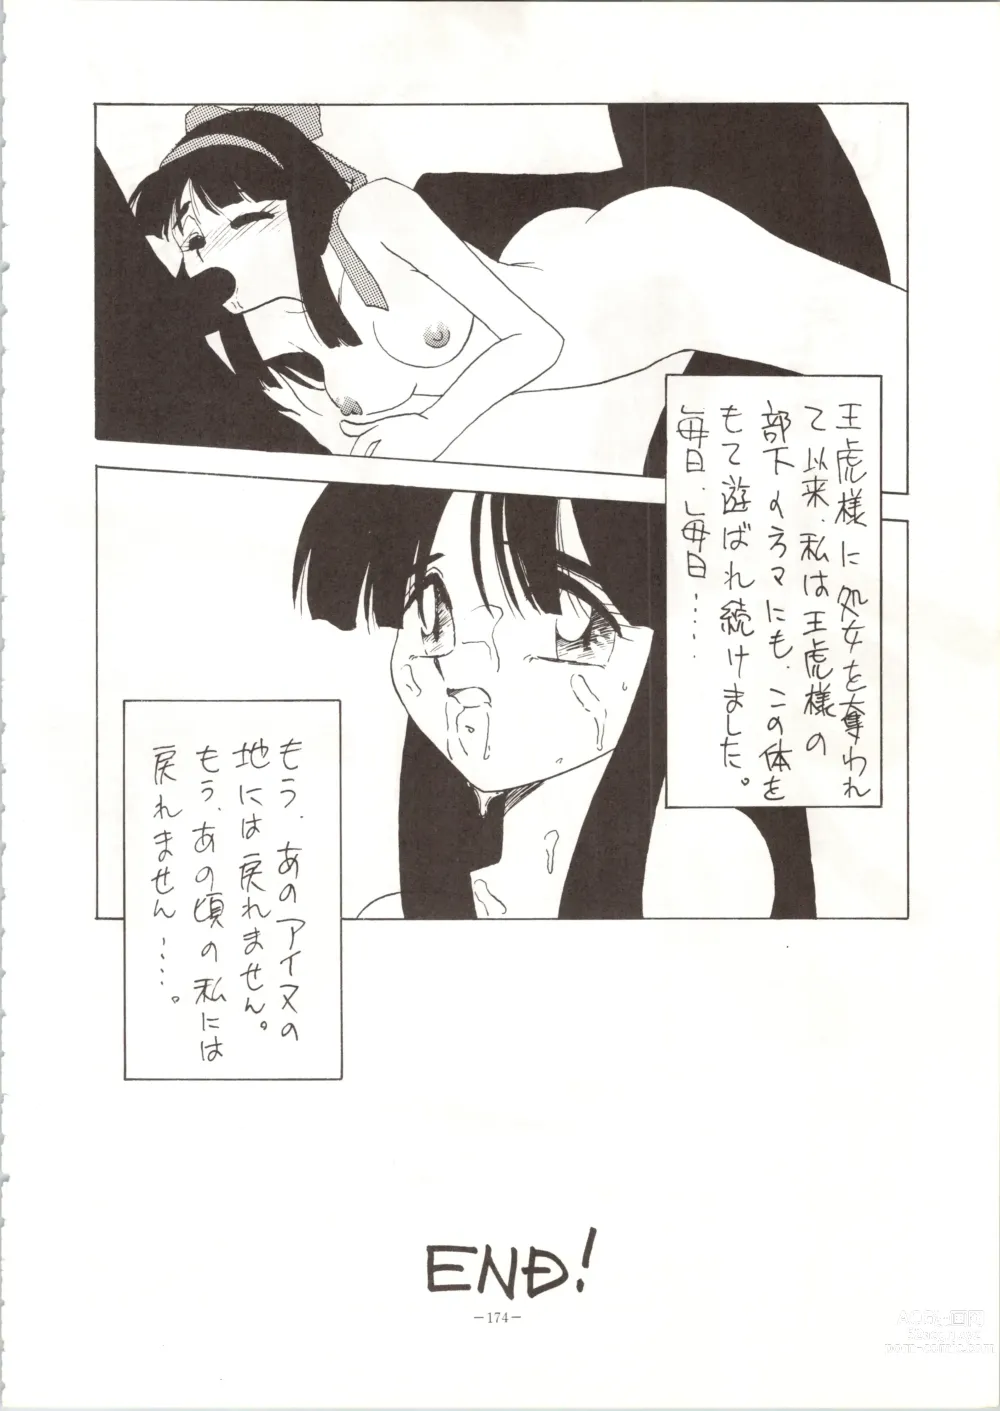 Page 174 of doujinshi MODEL SPECIAL